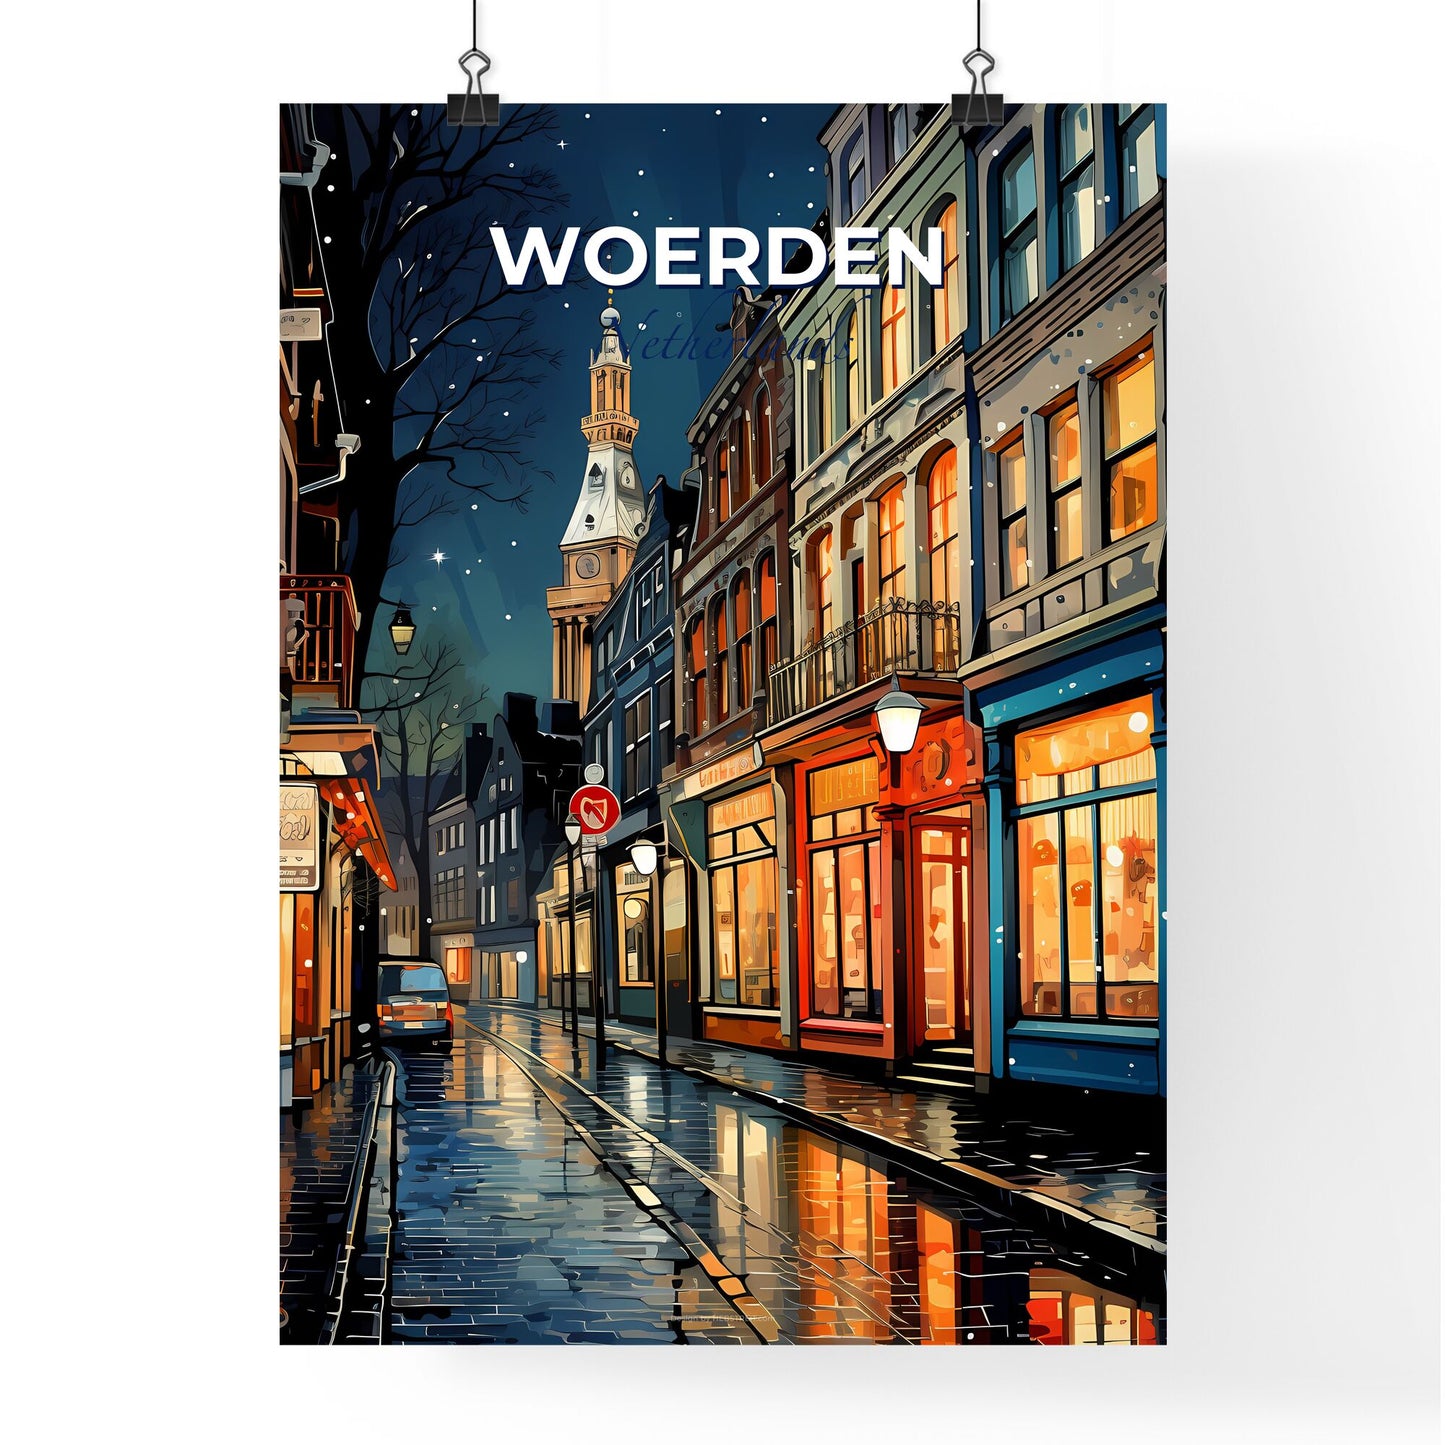 Woerden, Netherlands, A Poster of a street with buildings and a clock tower Default Title